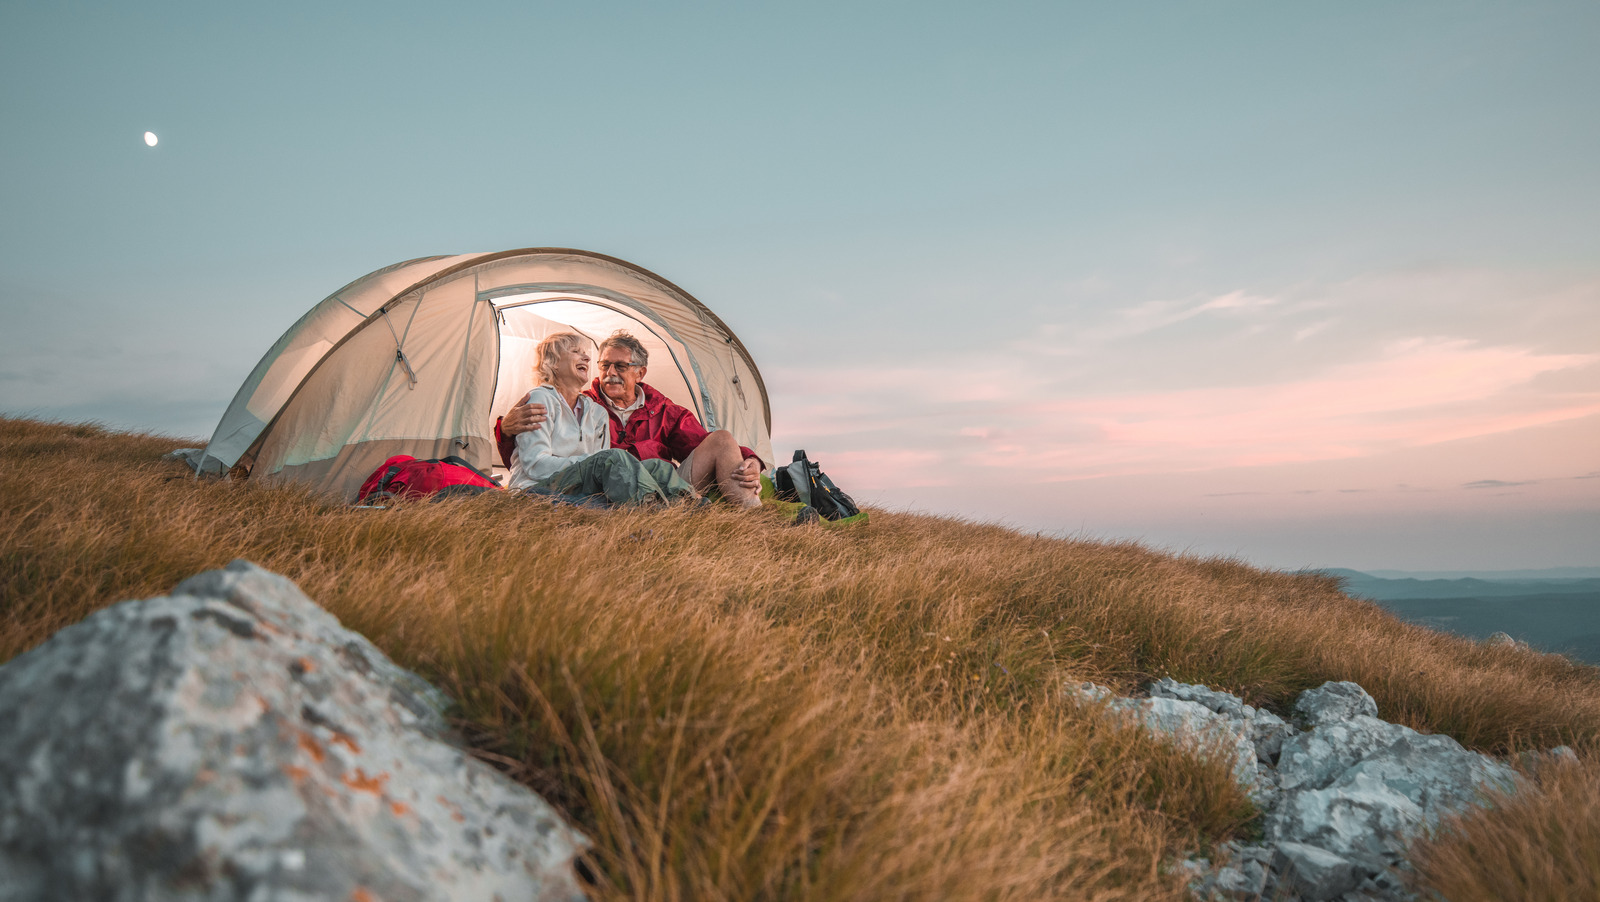 barbara looney recommends college couples camping trip pic